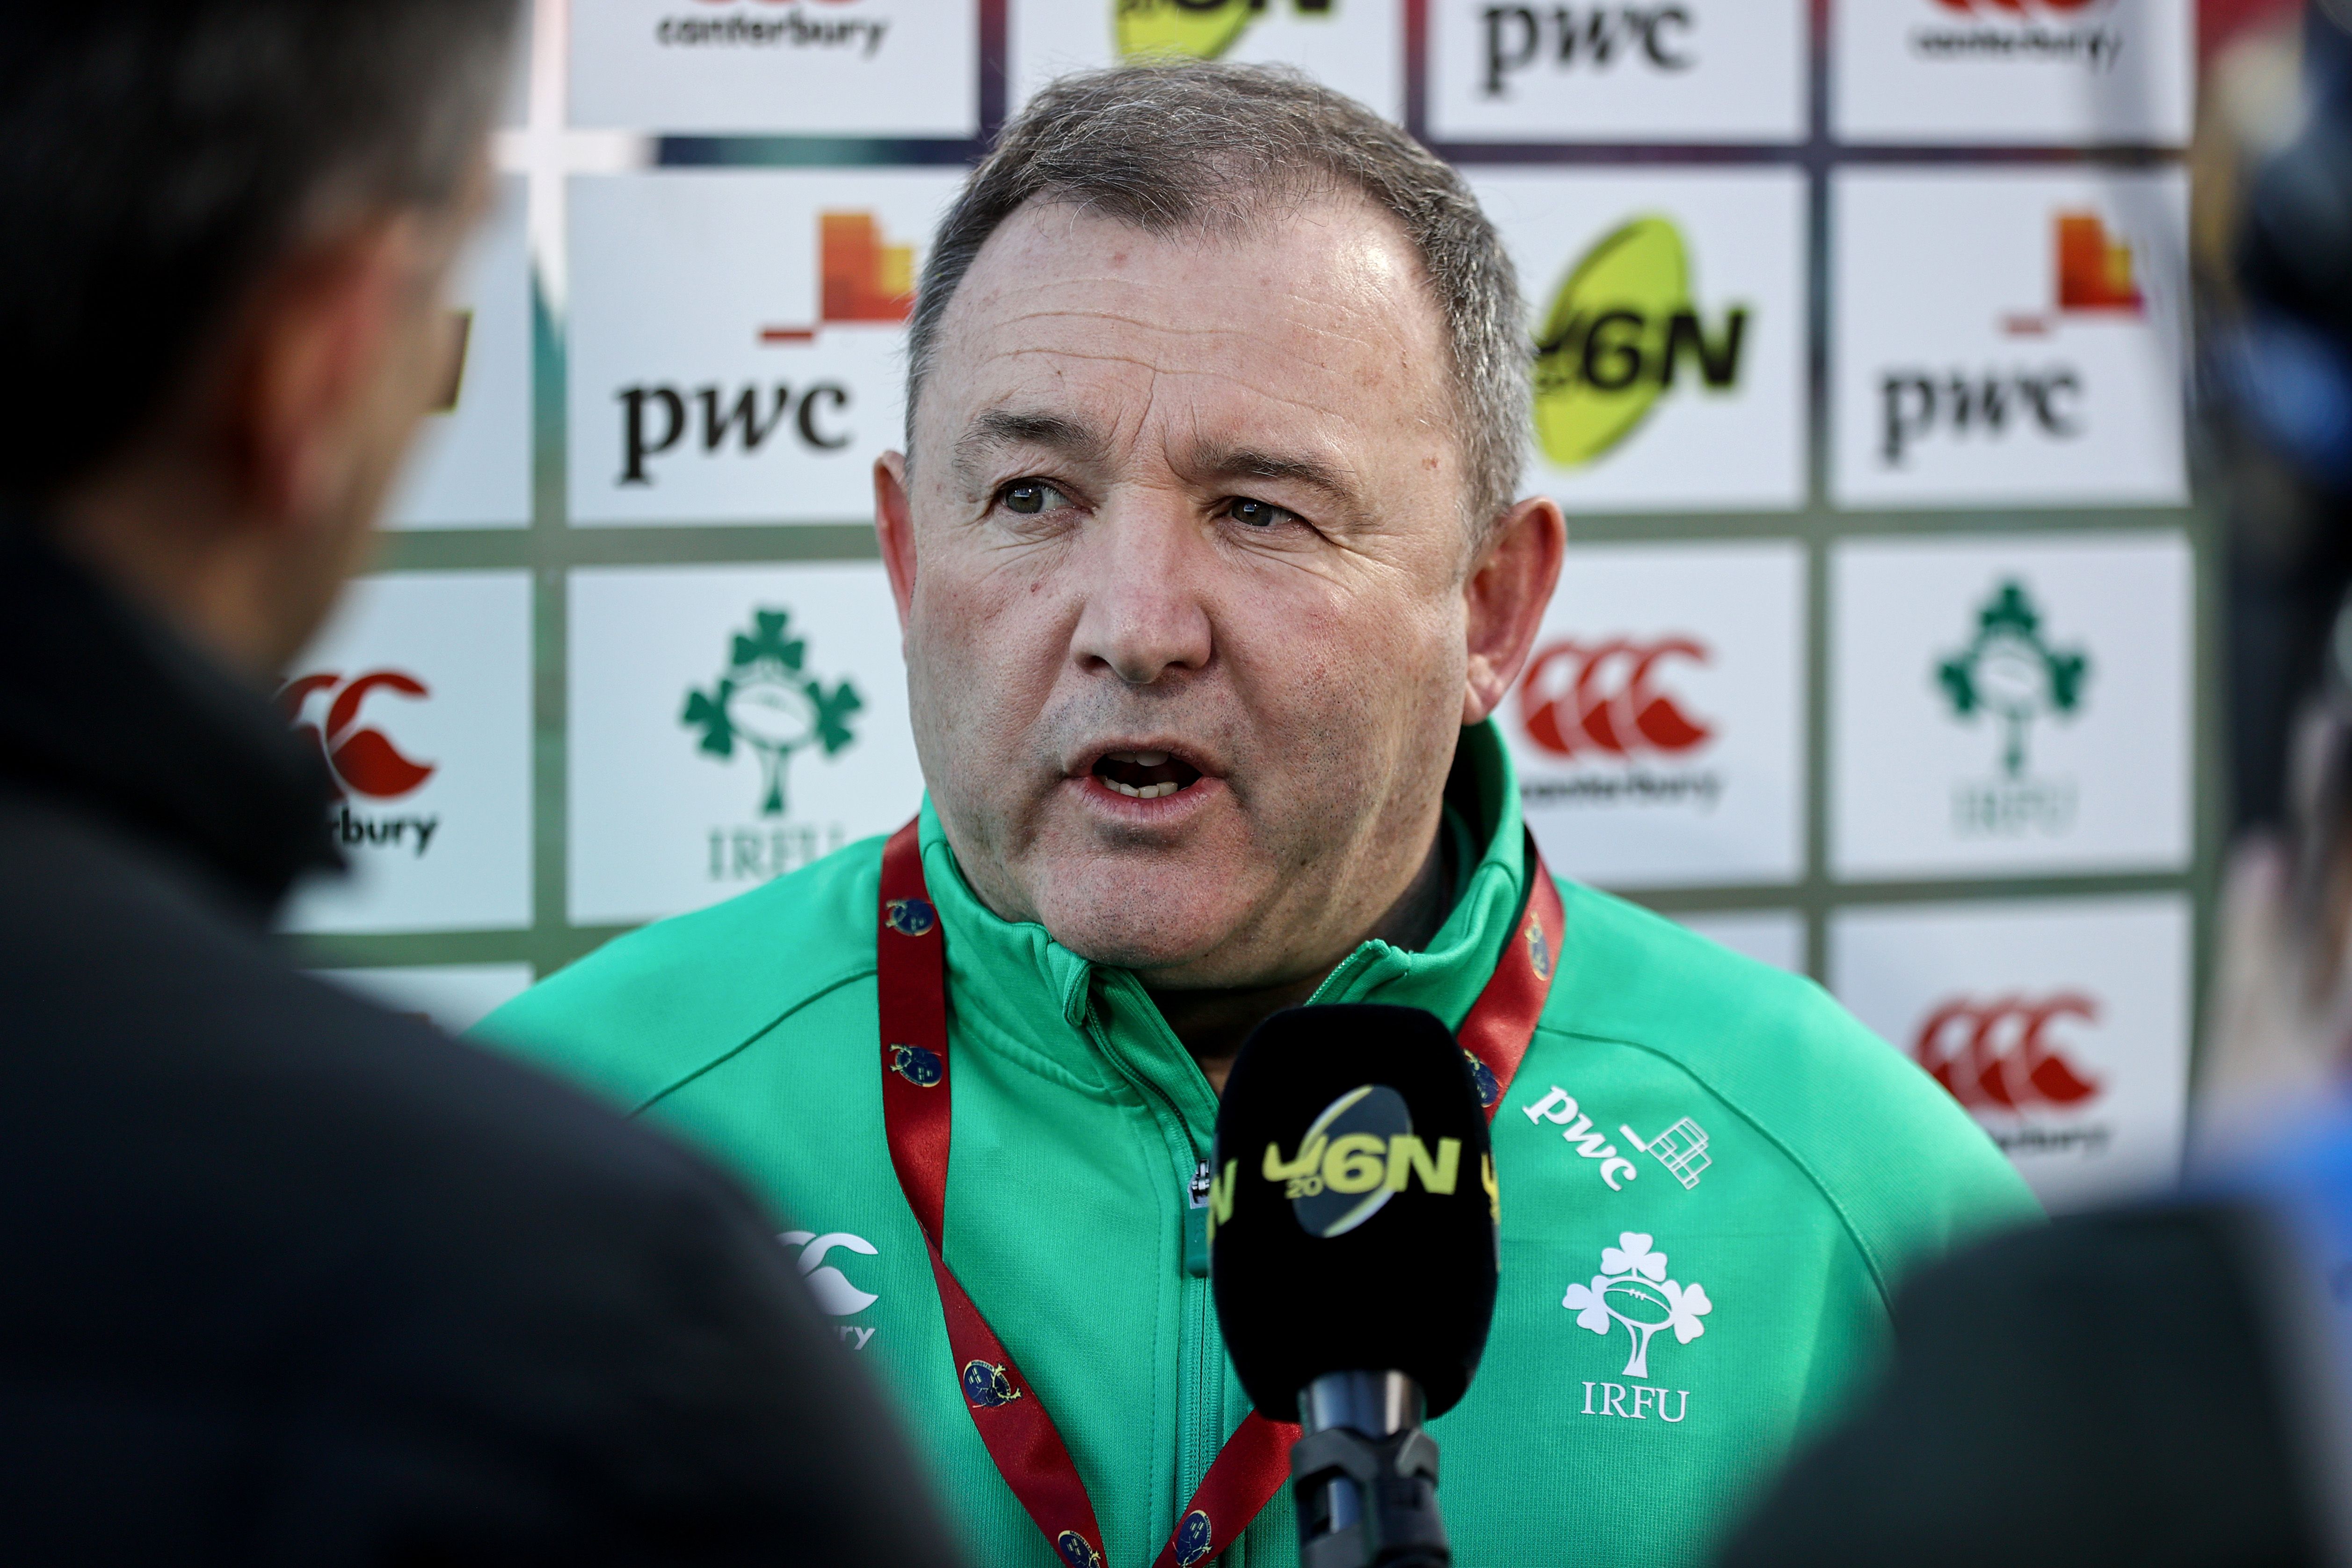 Ireland U20 coach Richie Murphy begins his tenure as interim Head Coach at Ulster with Saturday\'s game against the Sharks in Durban 